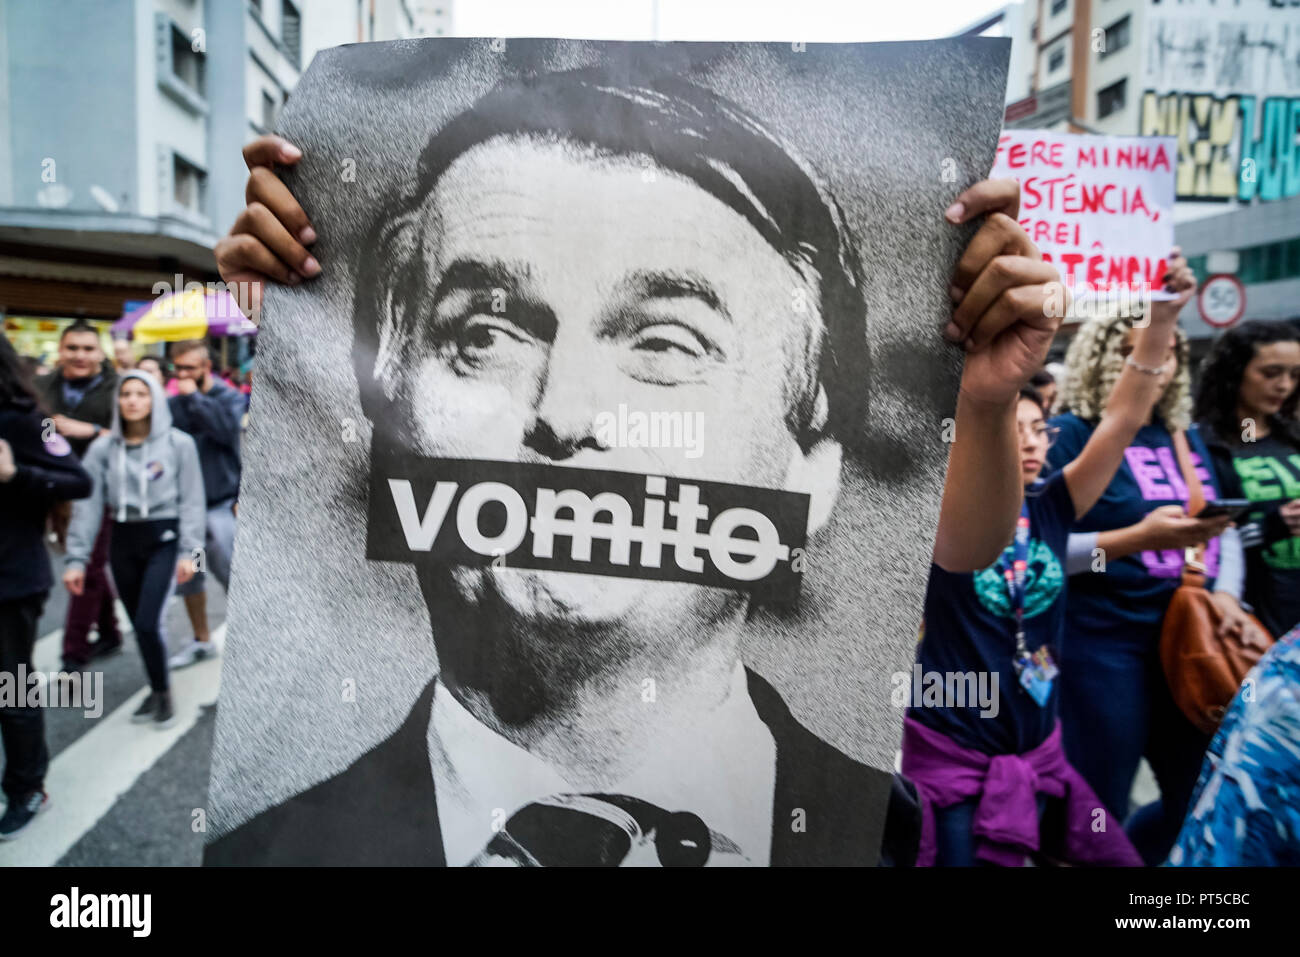 Sao Paulo, Brazil. 06th Oct, 2018. A woman holds up an anti-Bolsonaro poster at a demonstration against the presidential candidacy of far-right politician of Jair Bolsonaro on October 6, 2018. The sign translates as "vomit". (Credit: Pablo Albarenga/dpa) Credit: Pablo Albarenga/dpa/Alamy Live News Stock Photo